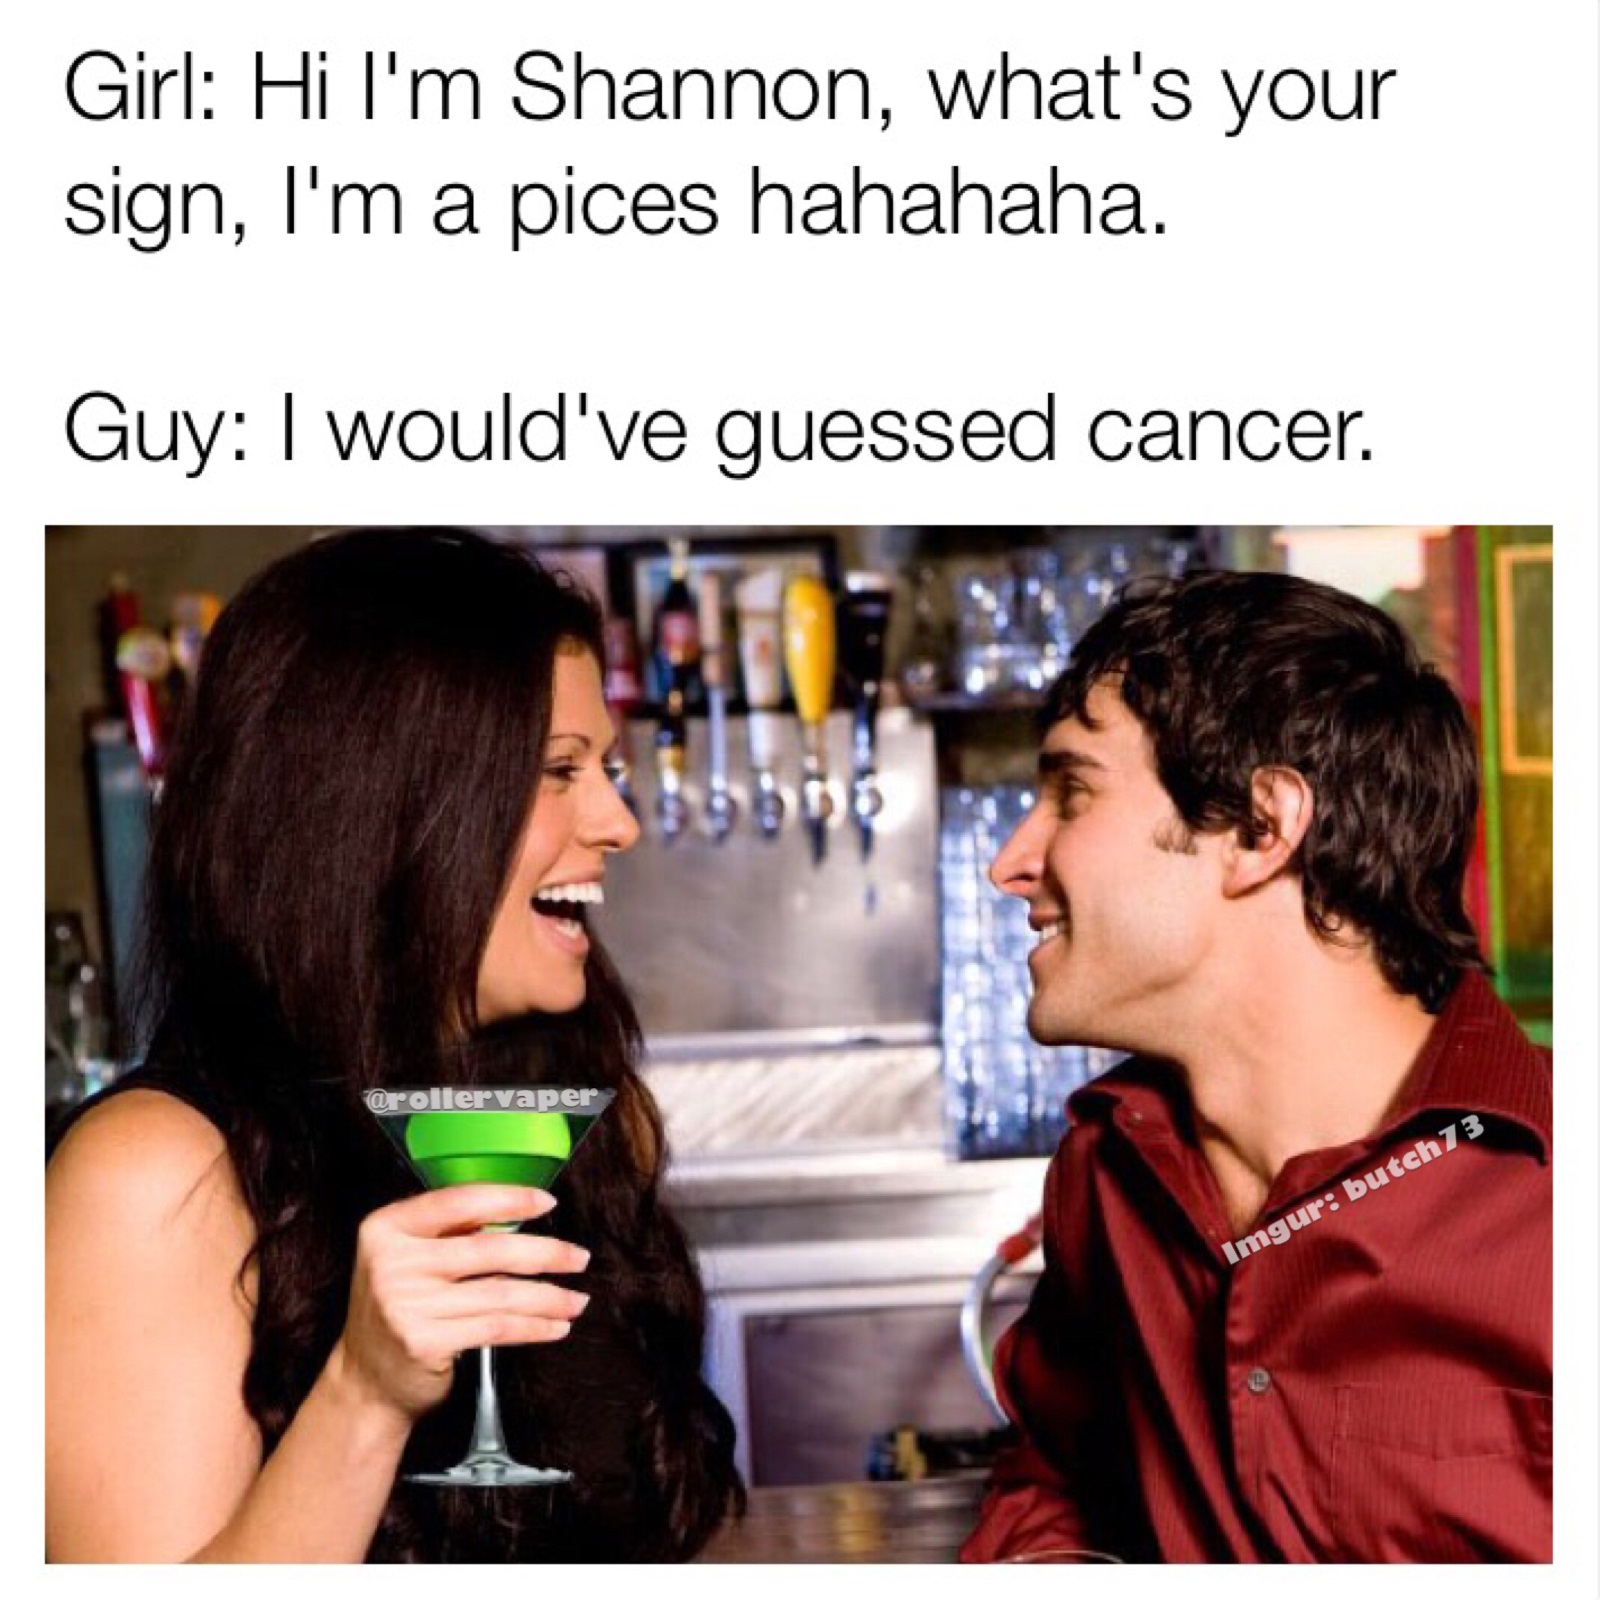 Funny meme of girl asking a guy what sign he is.